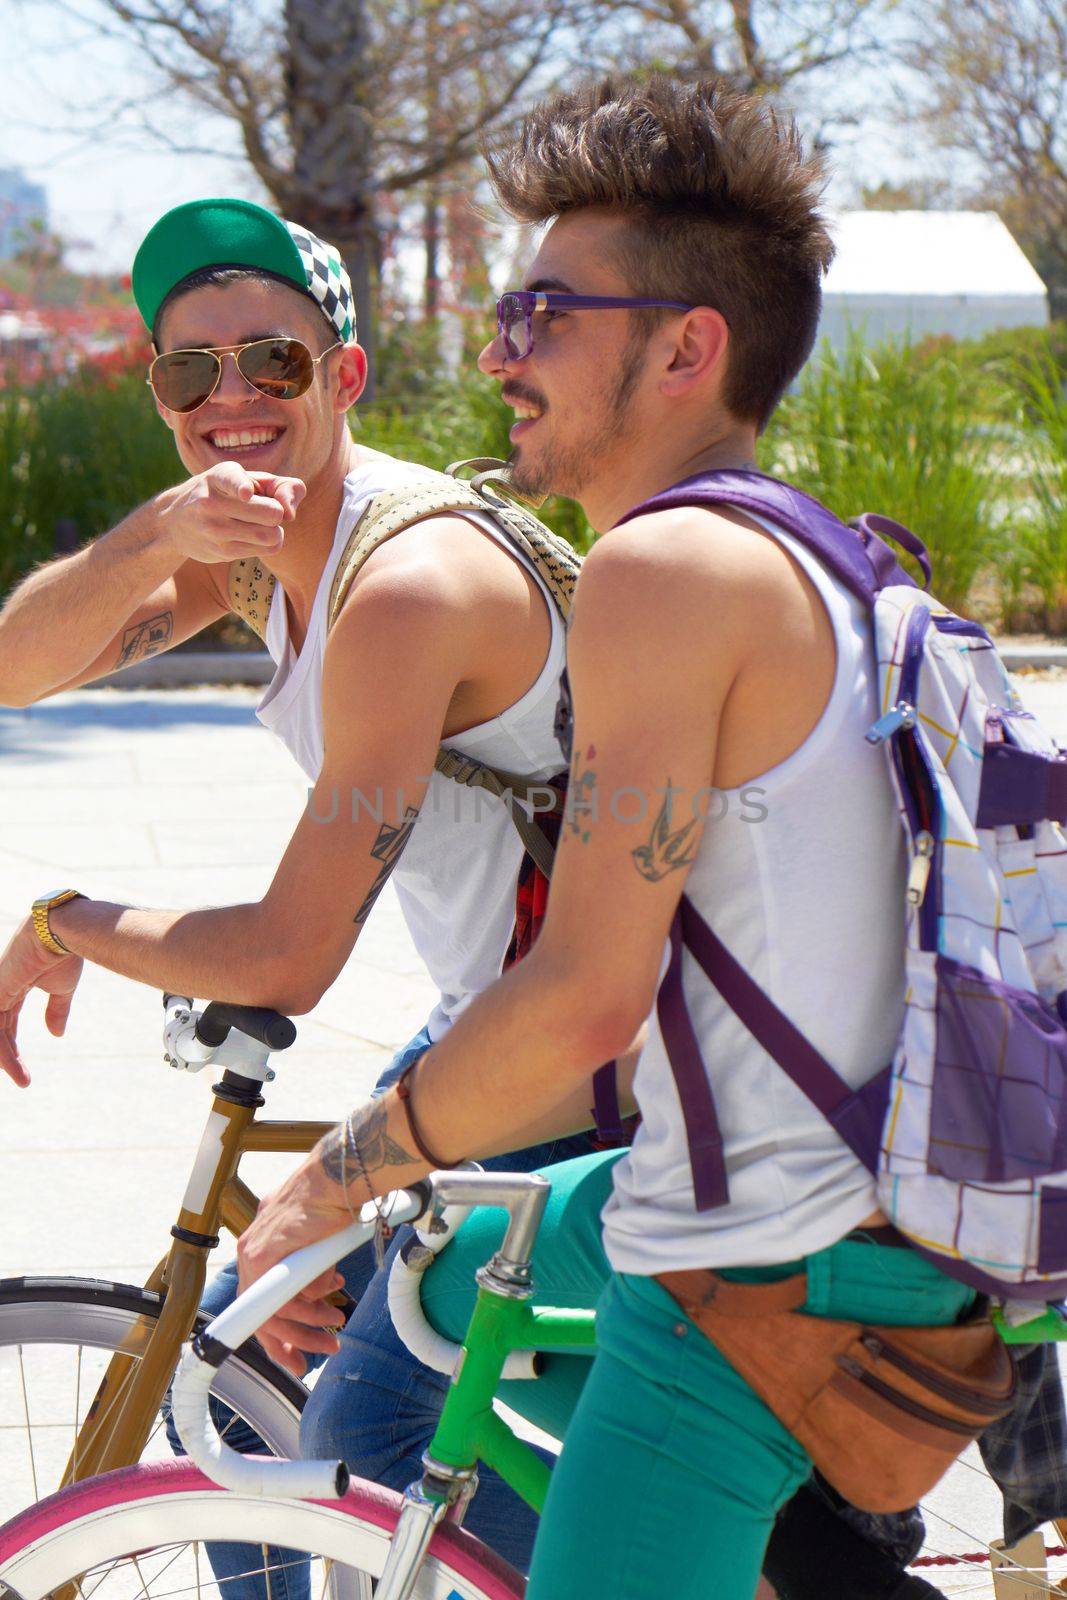 Hey, whatsup. two young guys sitting on their bikes outdoors